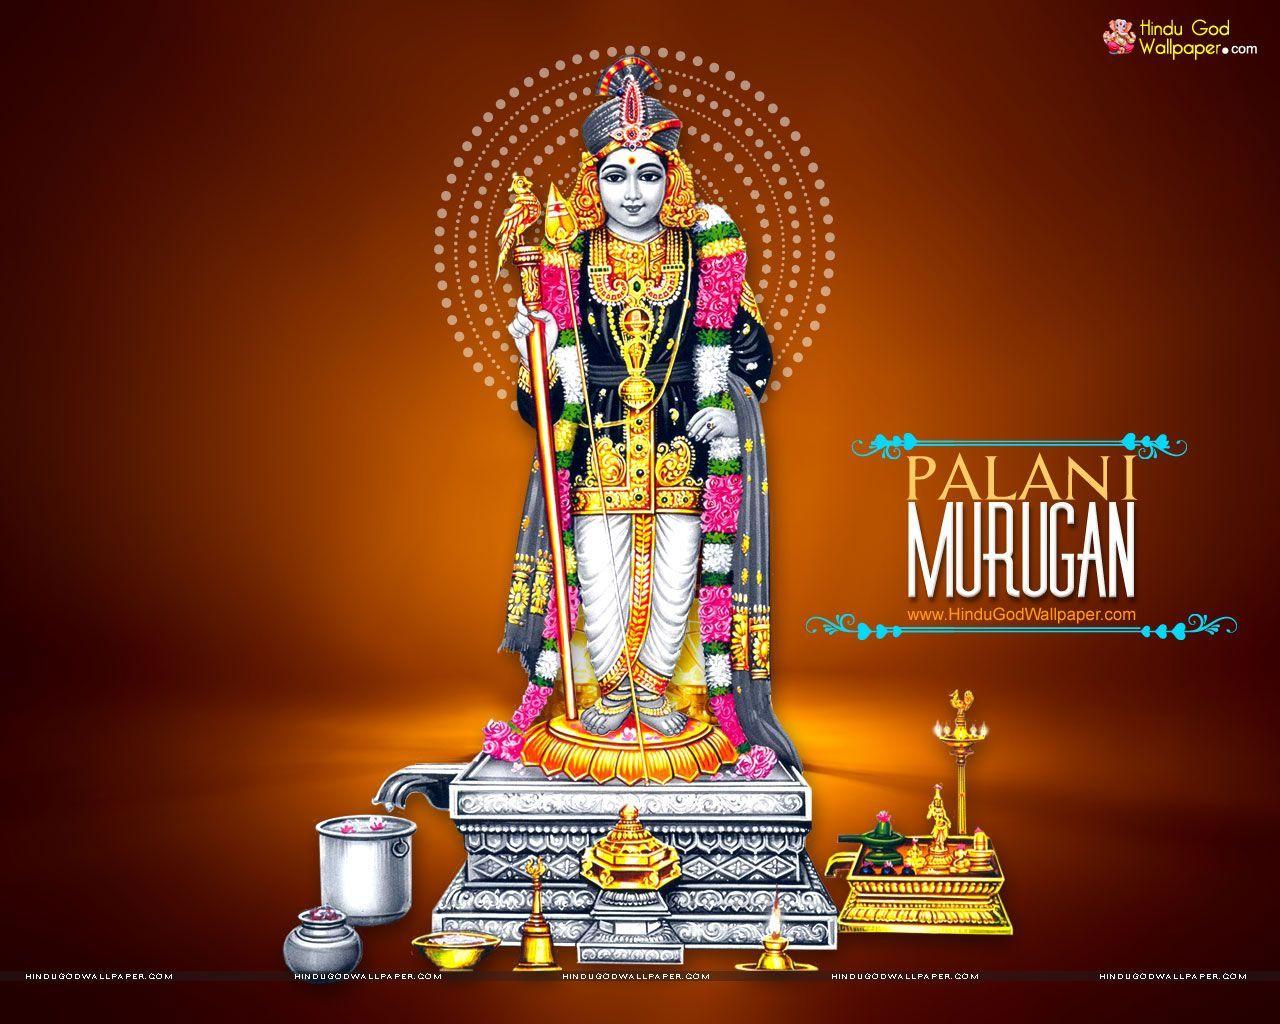 Featured image of post 1080P High Quality Ultra Hd Murugan Images / Subramanya mobile hd wallpapers lord murugan wallpapers hd s on murugan 1080p 2k 4k 5k hd wallpapersmurugan wallpapers wallpaper caveandroid mobile hd wallpaper murugan imagessubramanya …